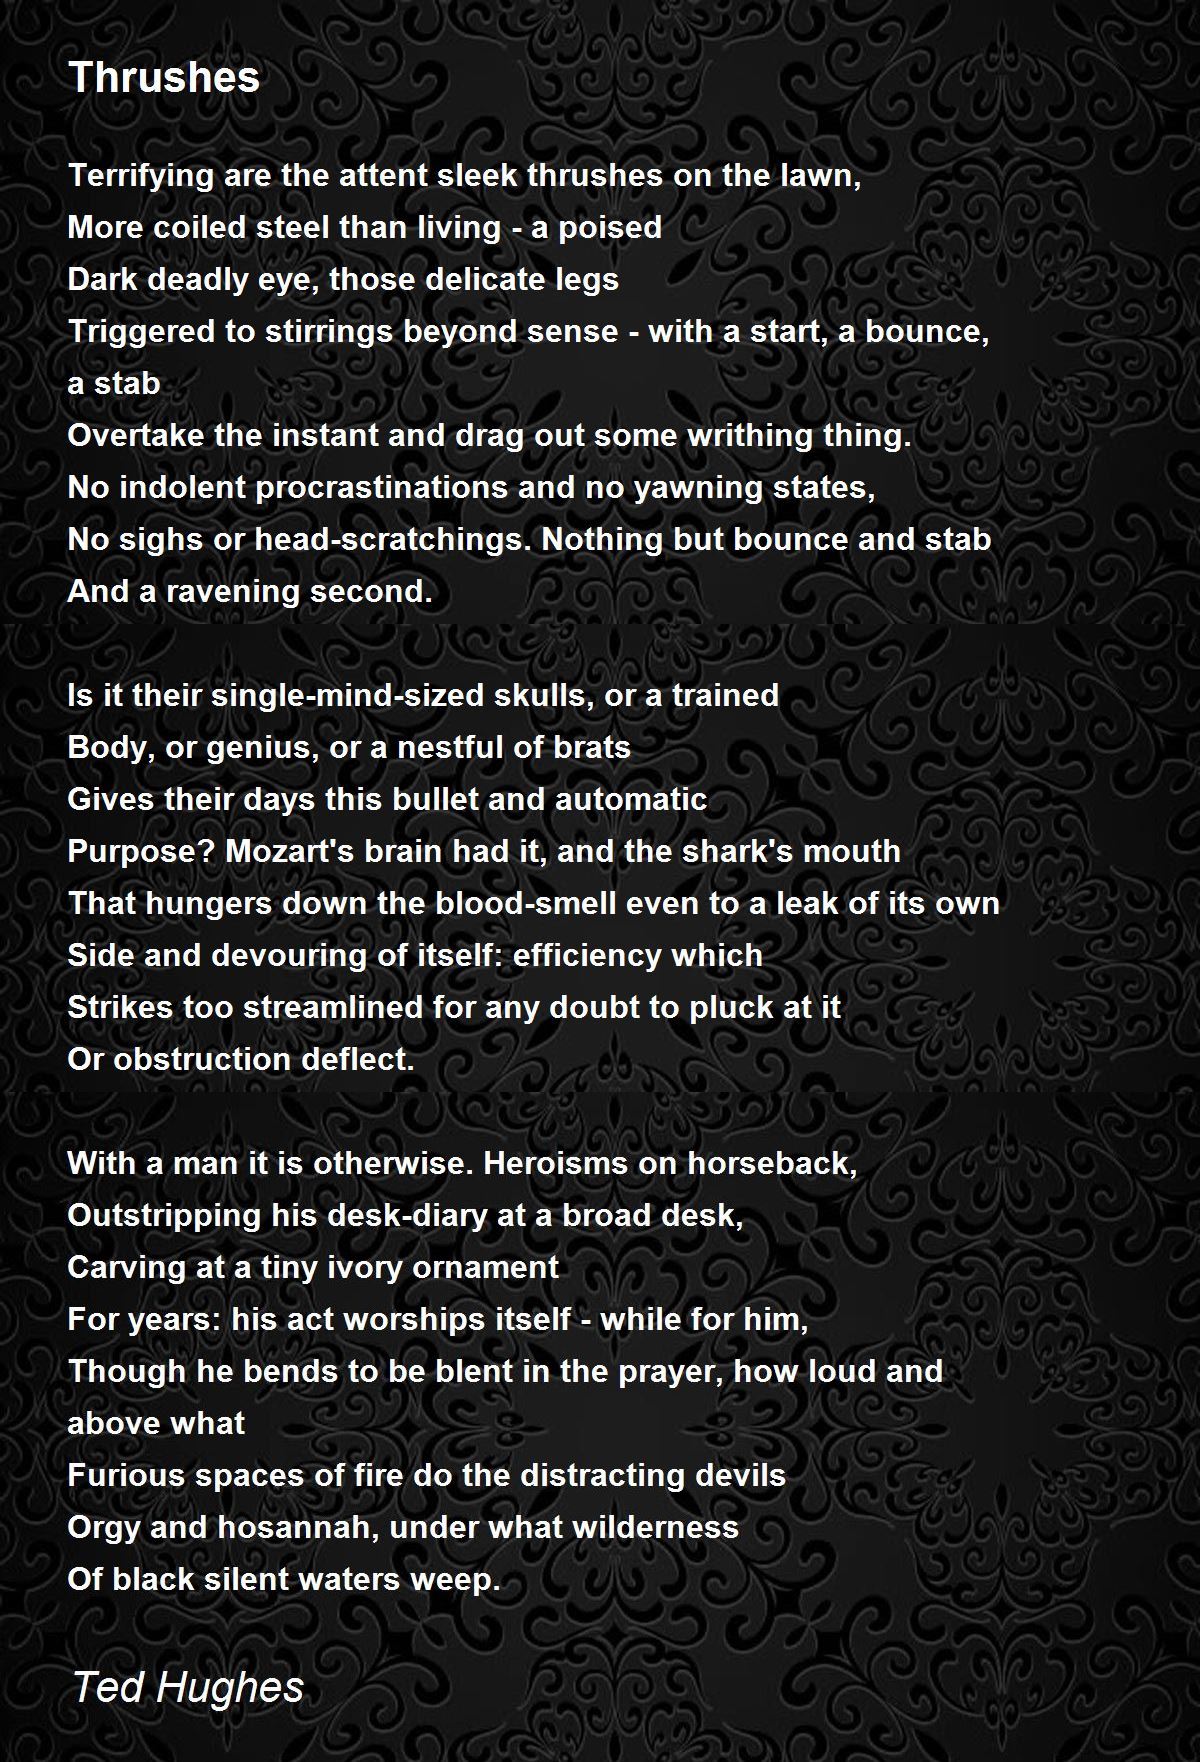 Thrushes by Ted Hughes - Thrushes Poem